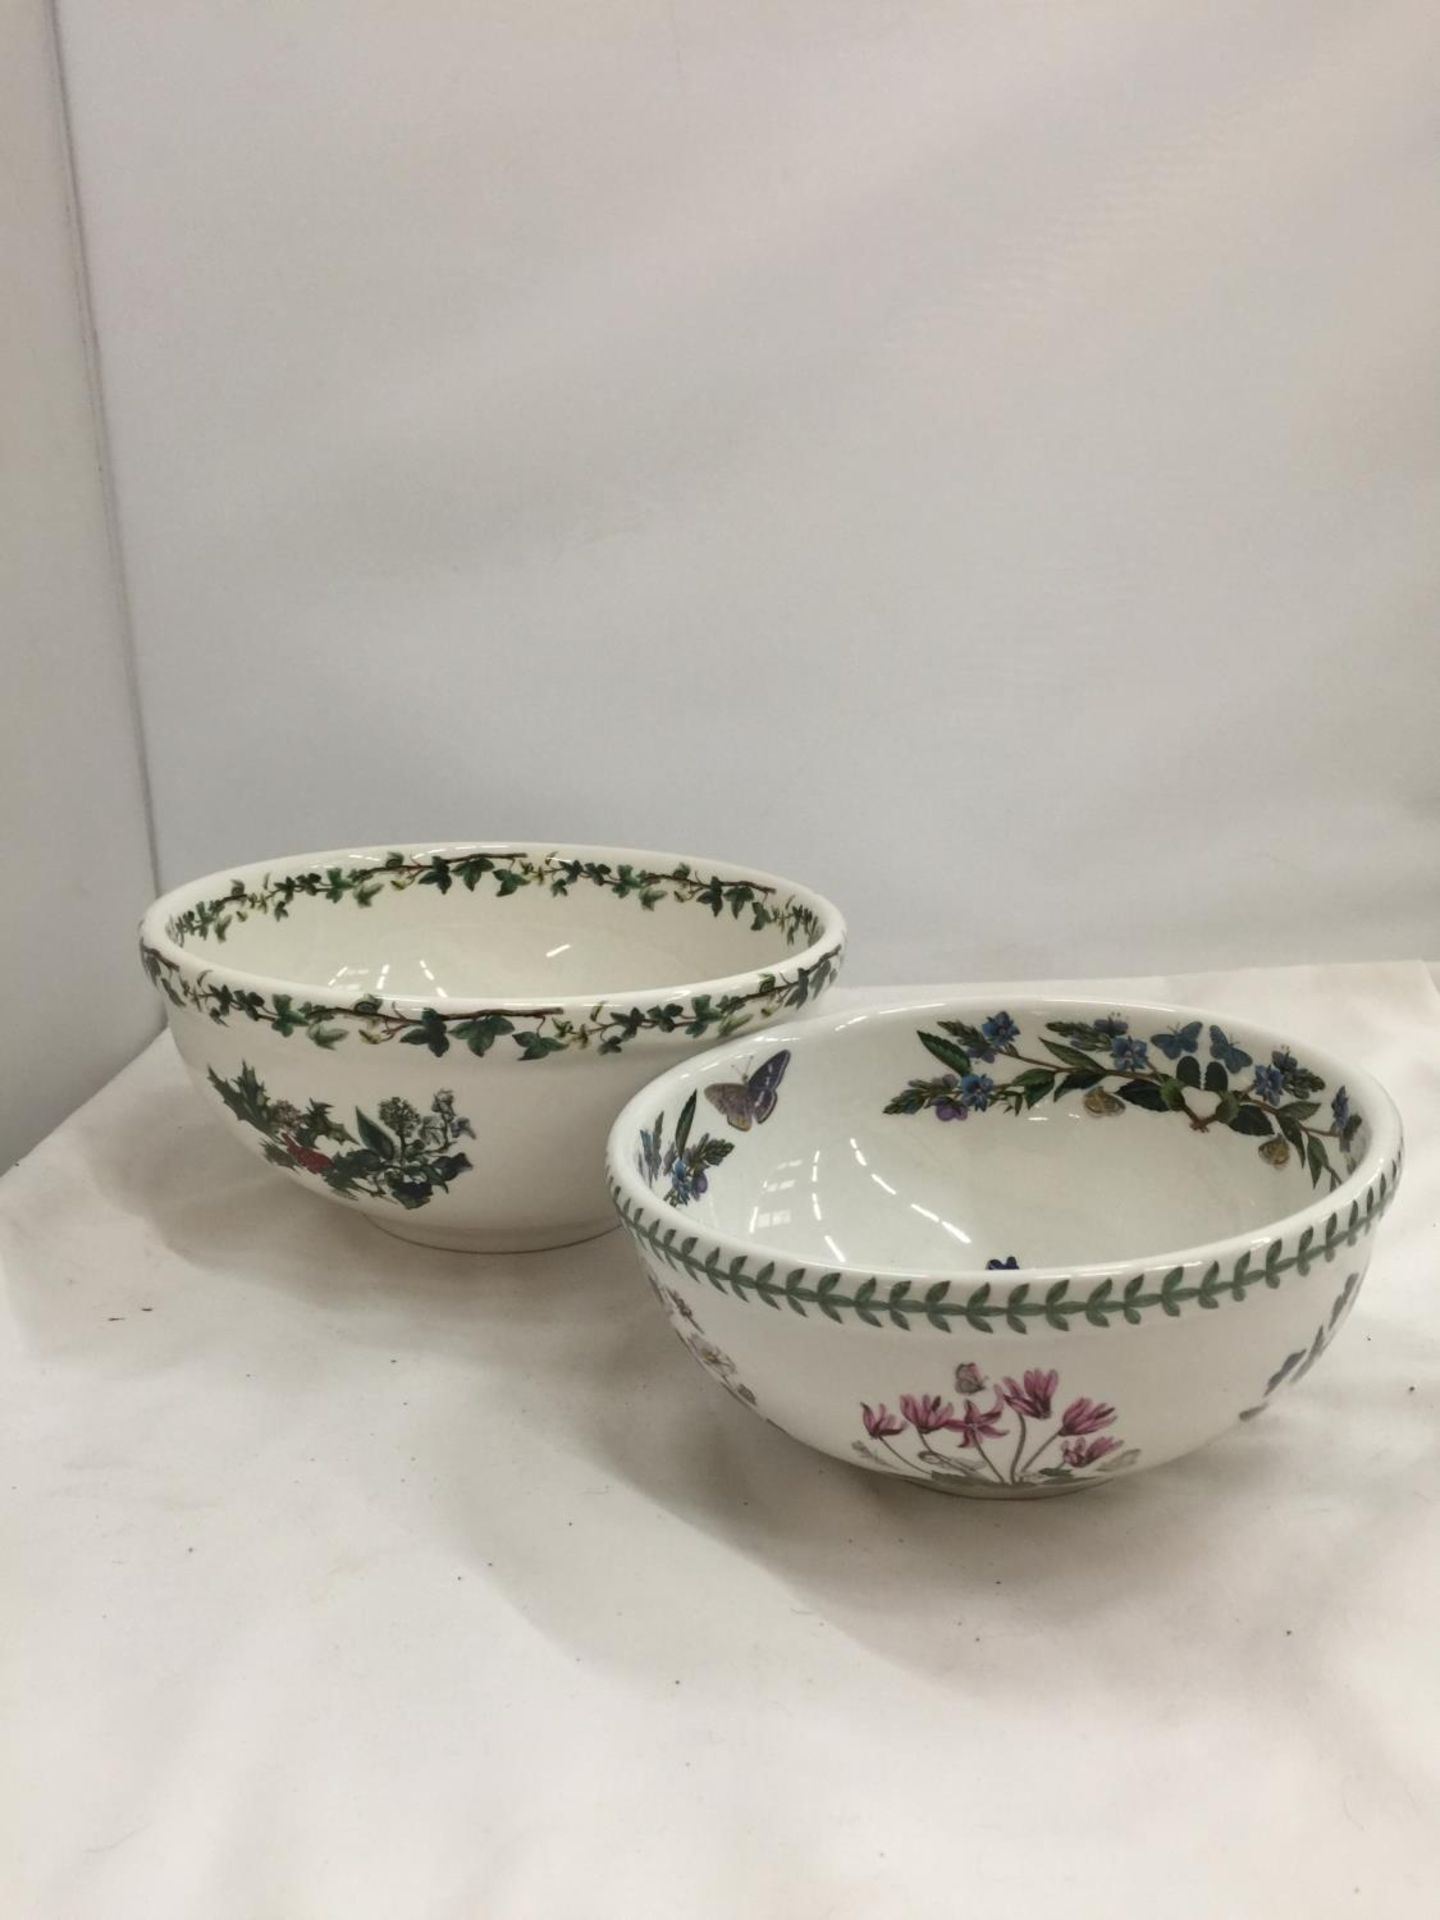 TWO PORTMERION BOWLS, ONE BEING CHRISTMAS 'THE HOLLY AND THE IVY' DIAMETER 23.5CM, THE OTHER